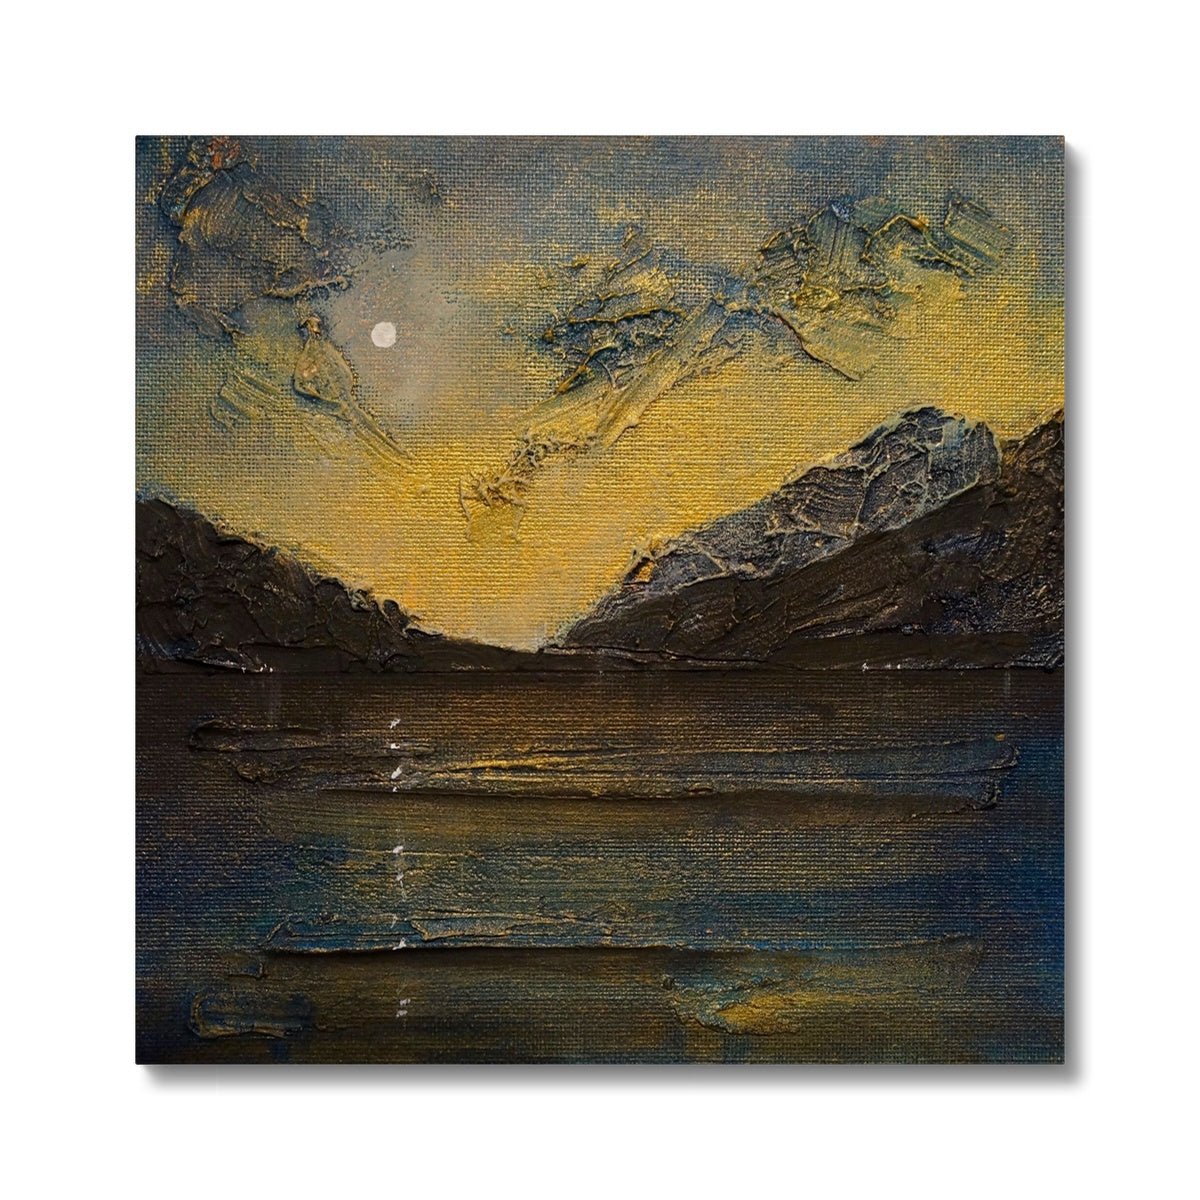 Loch Lomond Moonlight Painting | Canvas From Scotland-Contemporary Stretched Canvas Prints-Scottish Lochs & Mountains Art Gallery-24"x24"-Paintings, Prints, Homeware, Art Gifts From Scotland By Scottish Artist Kevin Hunter